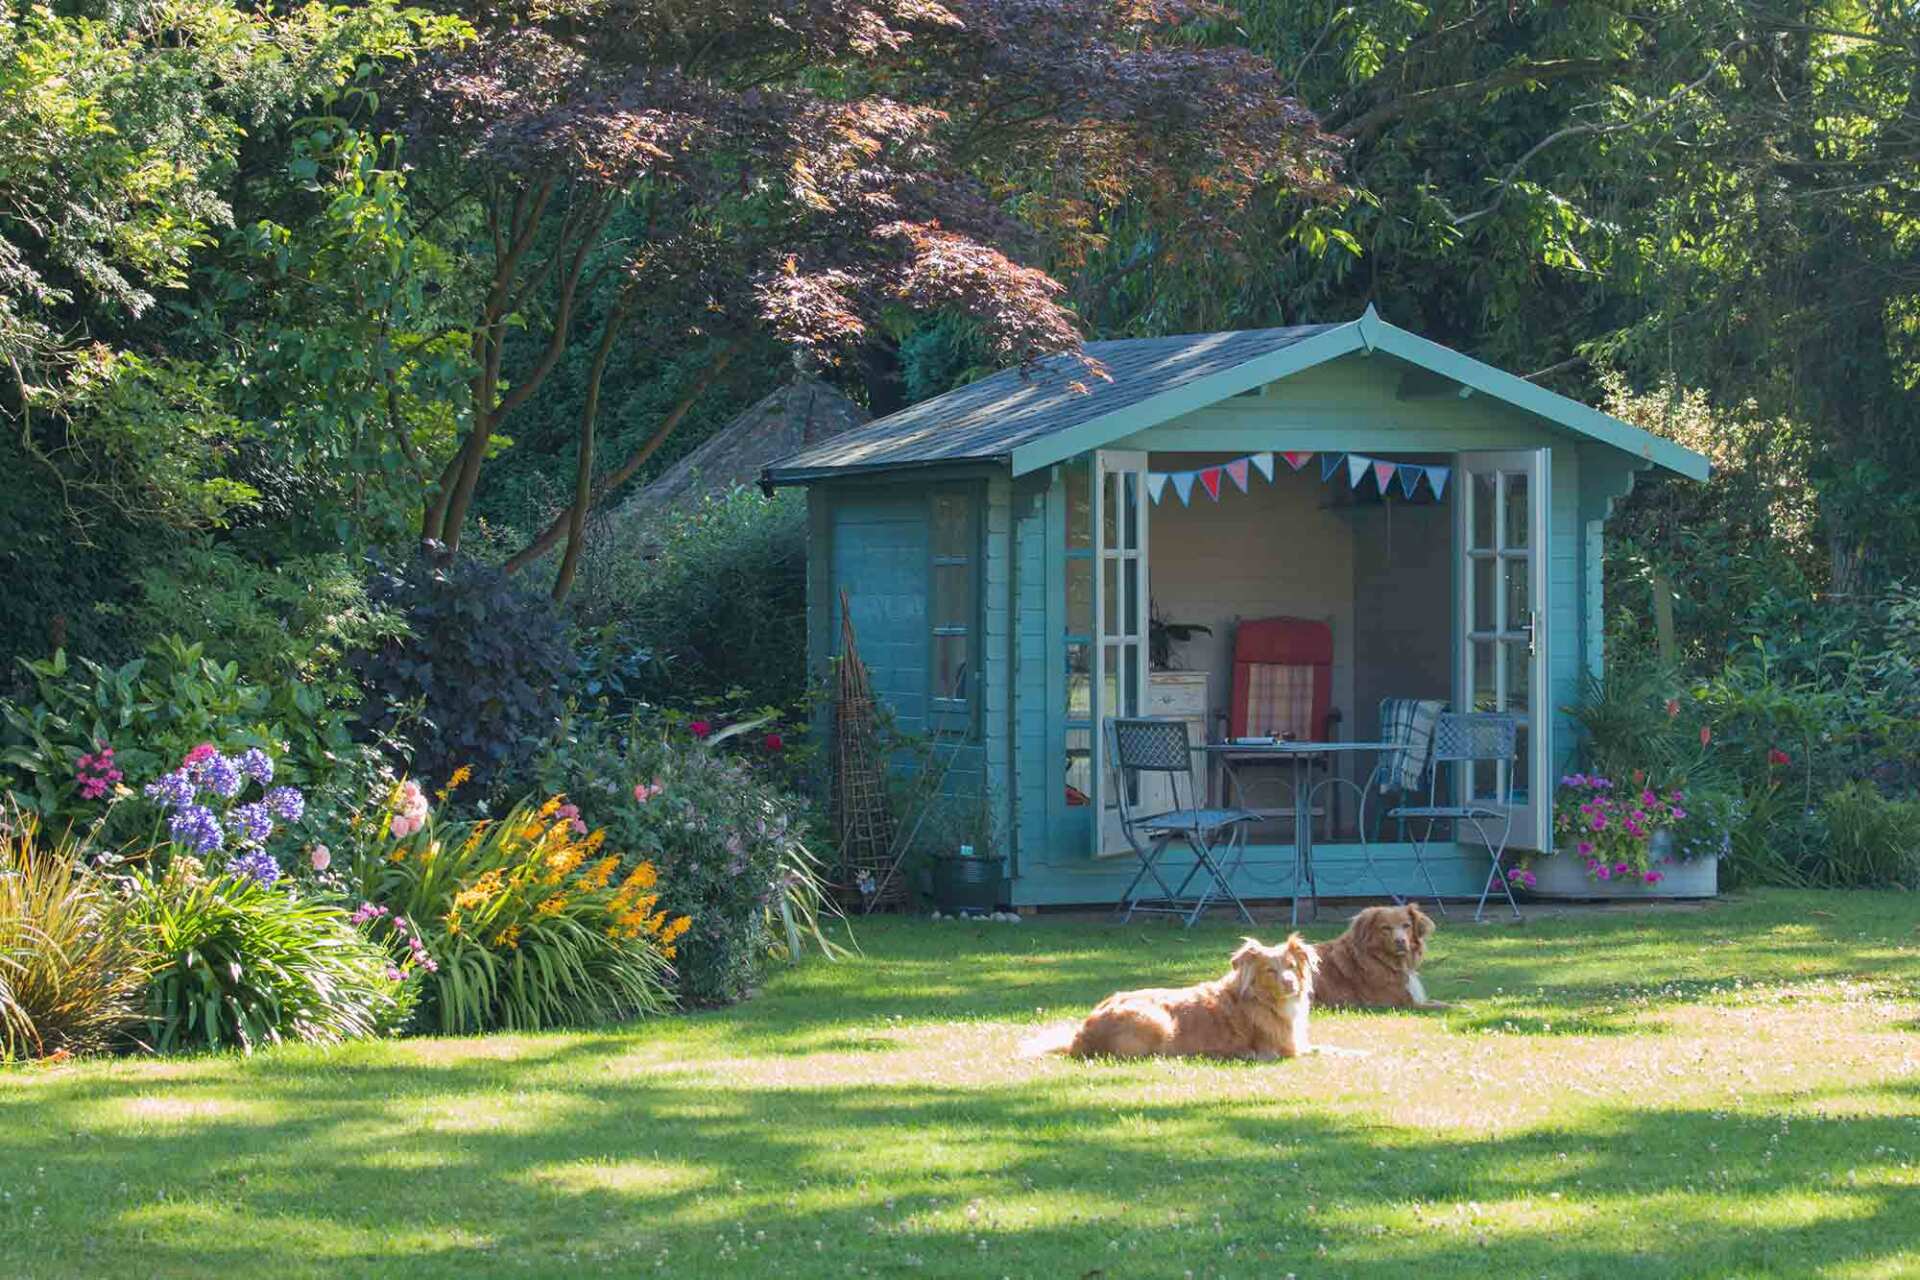 Summer in the garden on a sunny day with the summer house with the doors open and 2 dogs relaxing on the grass